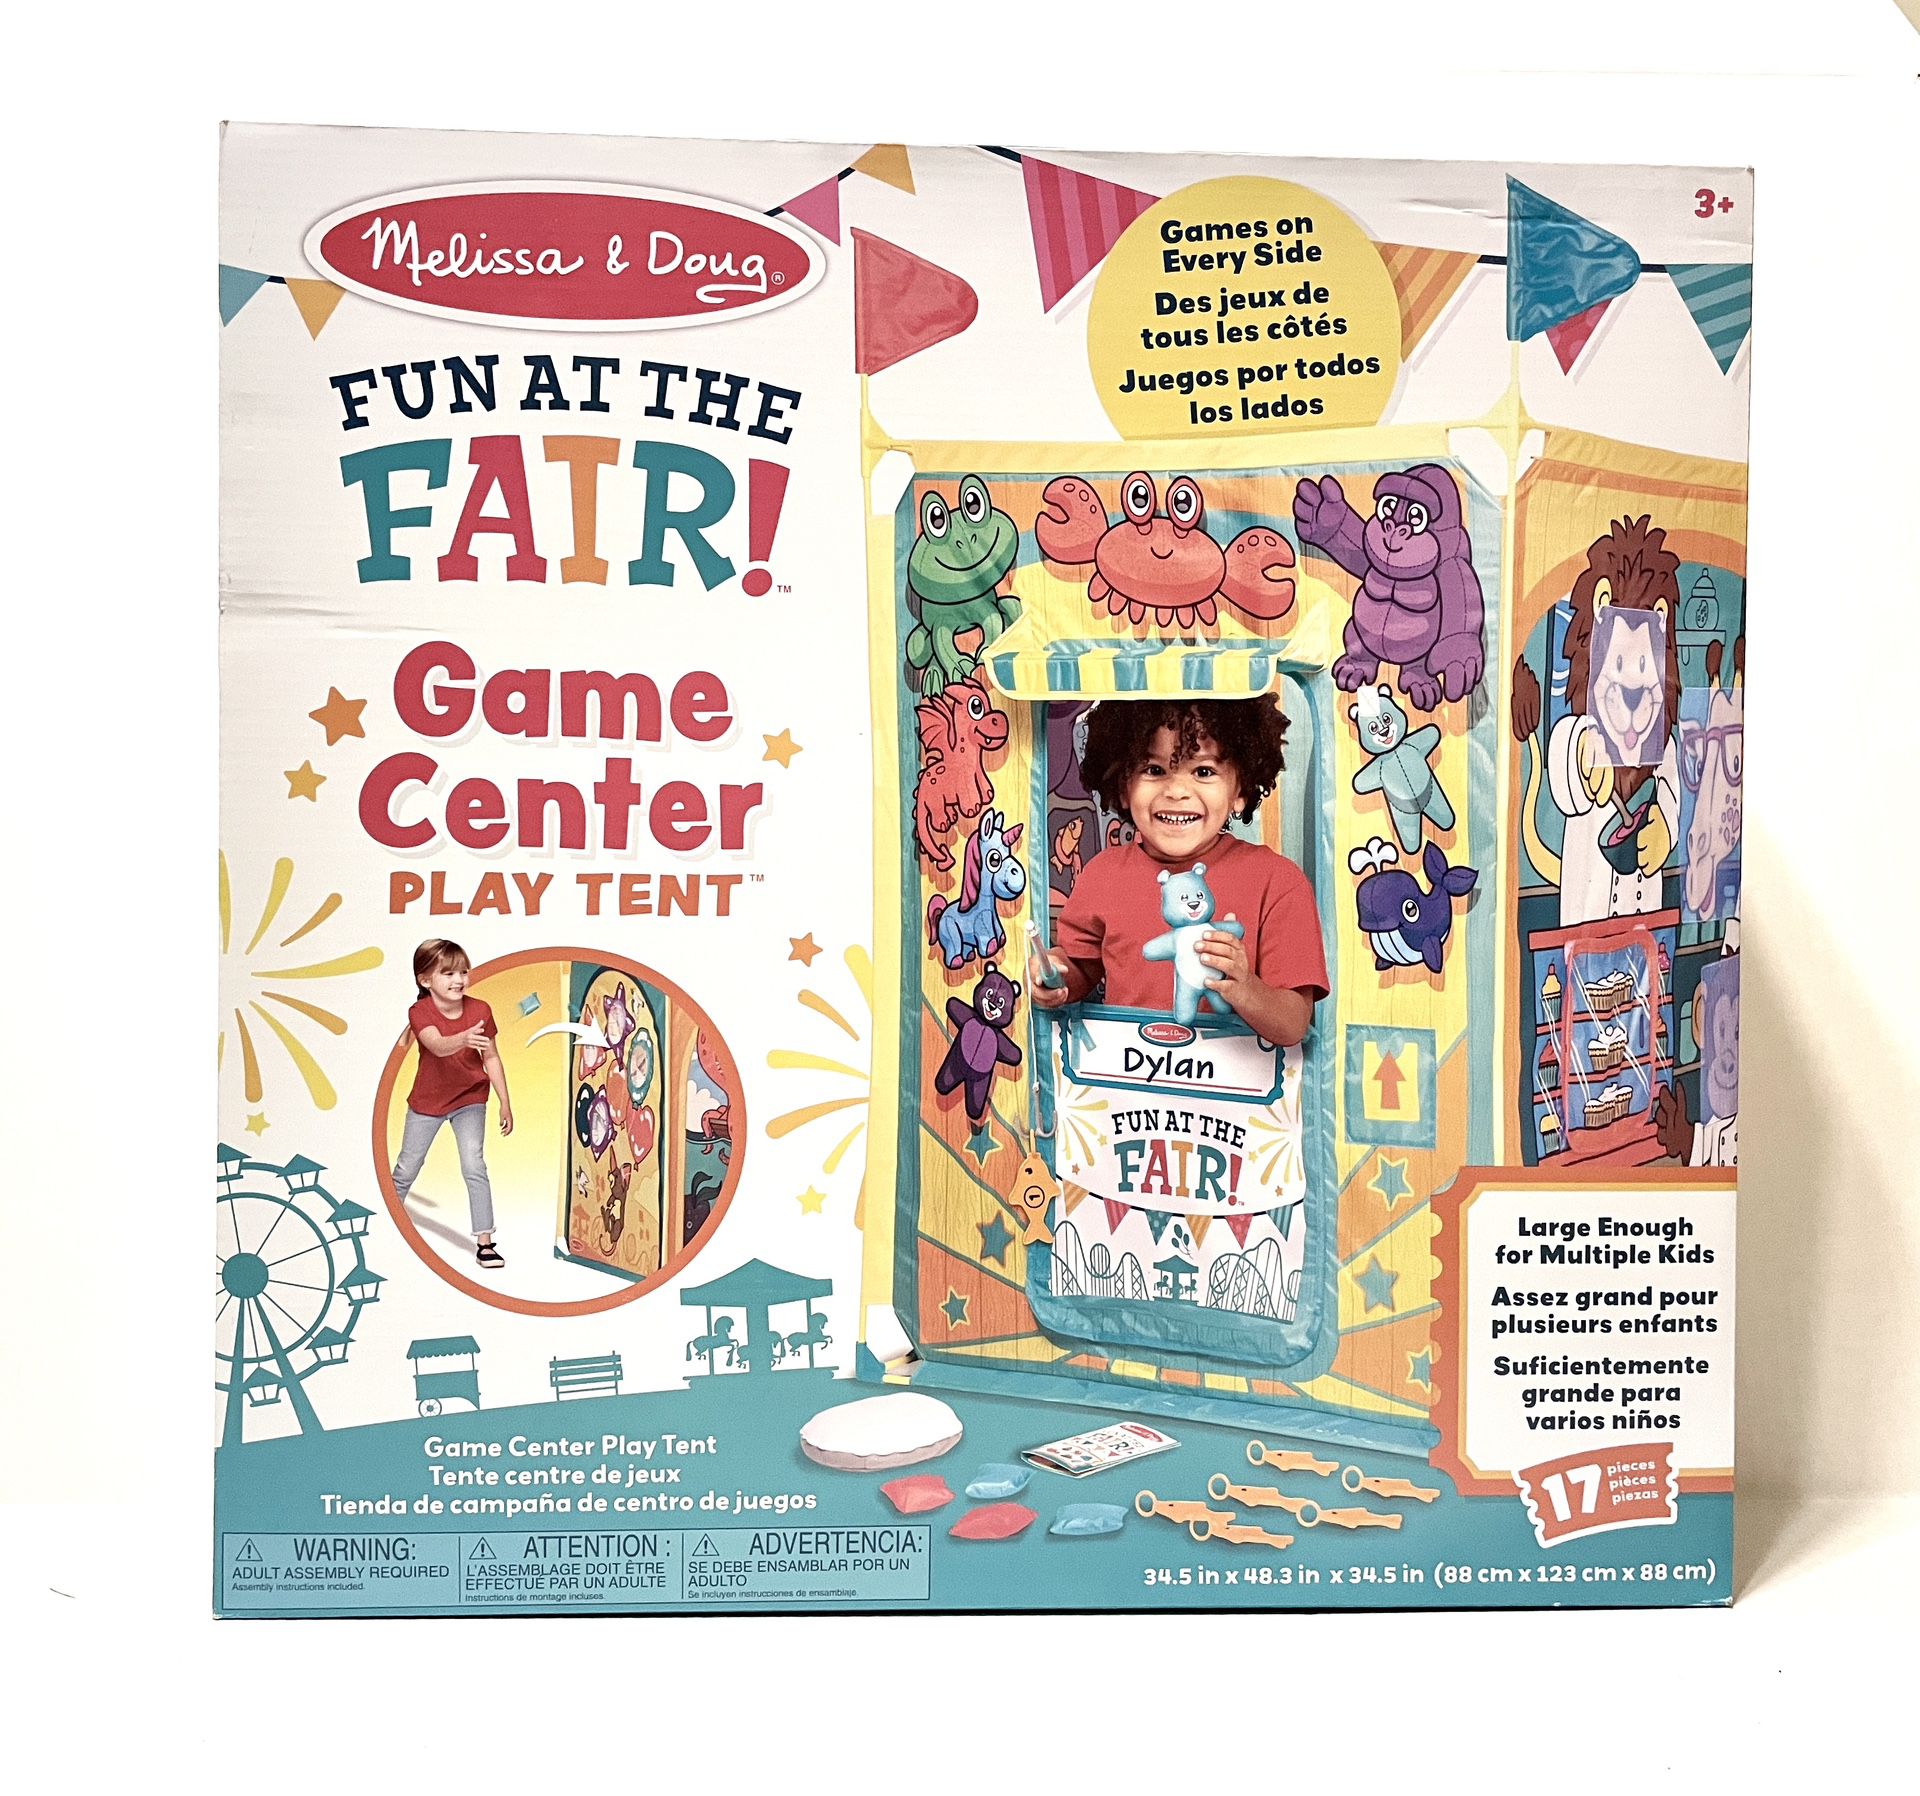 NEW Melissa & Doug Fun At The Fair Game Center Play Tent,- Great Gift!